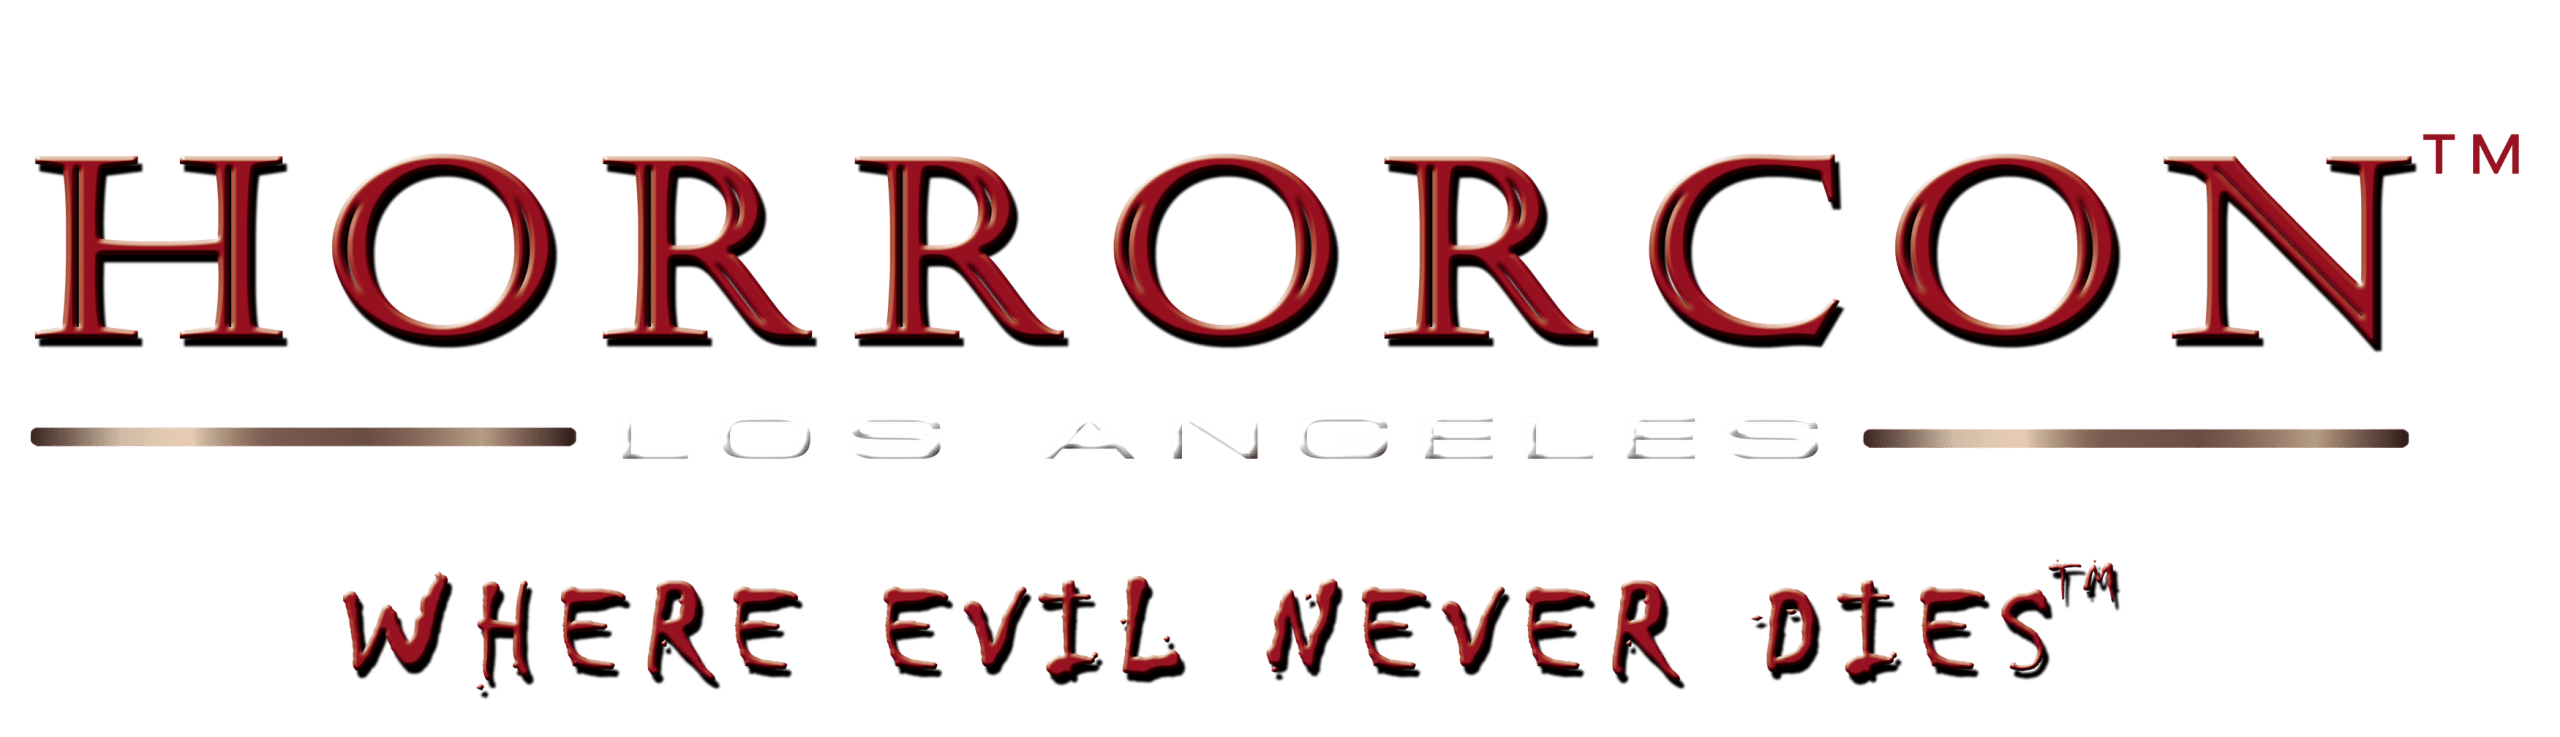 HORRORCON™ LOS ANGELES The Horror Entertainment Convention Where